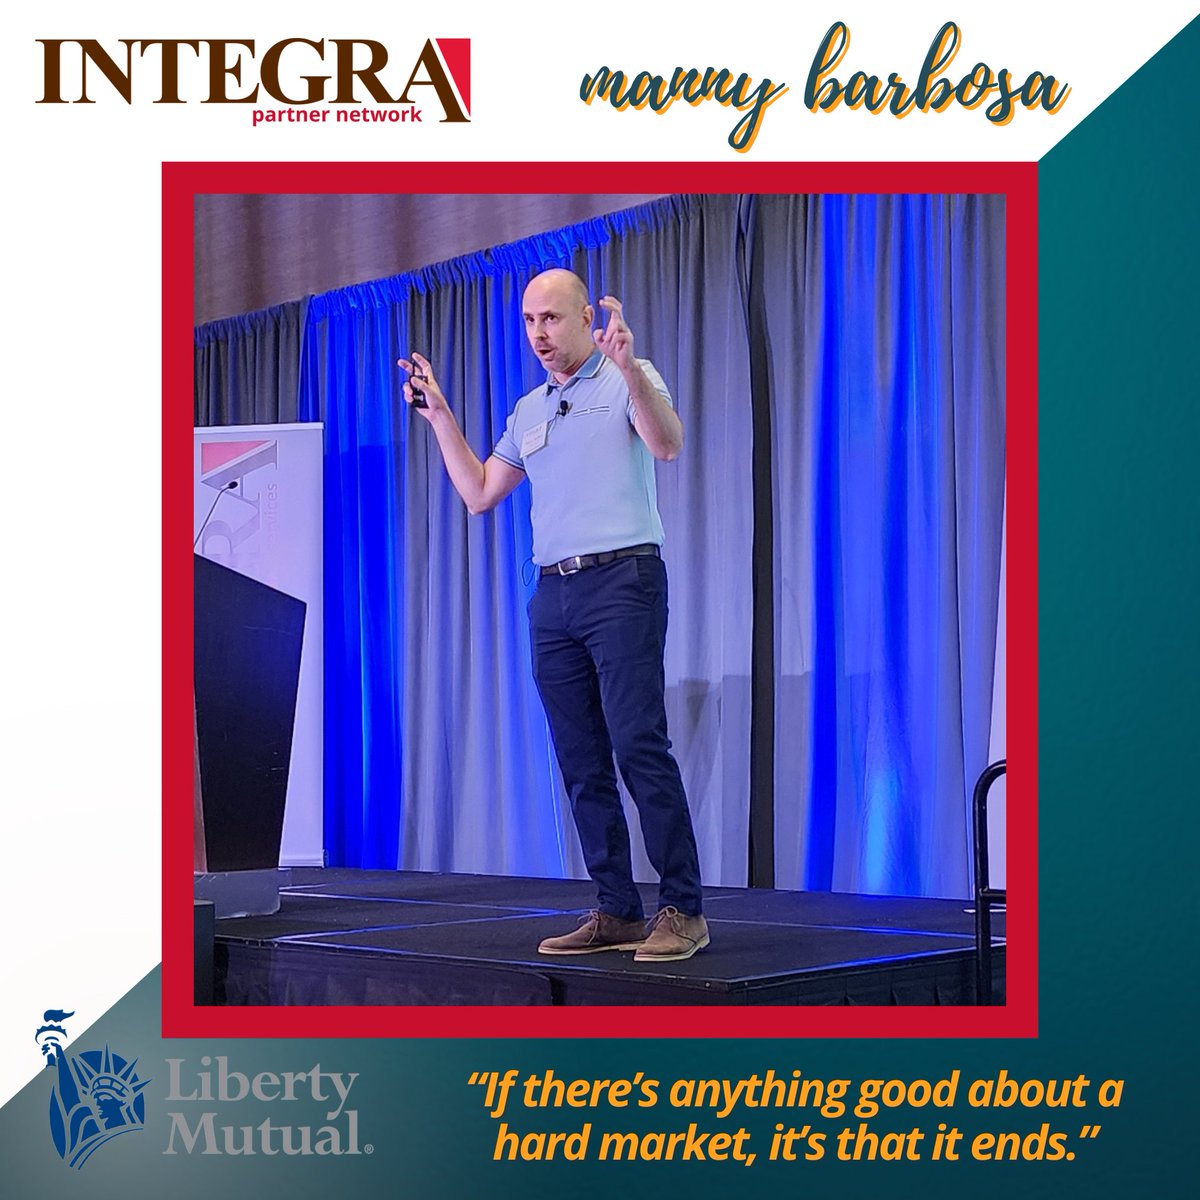 We were thrilled to have Manny Barbosa, growth consultant for @LibertyMutual, share his insights on unlocking the power of digital in our agencies at the Integra Partner Network conference. Find your way to Integra!

#insurtech #independentagency #independentagent #findyourway